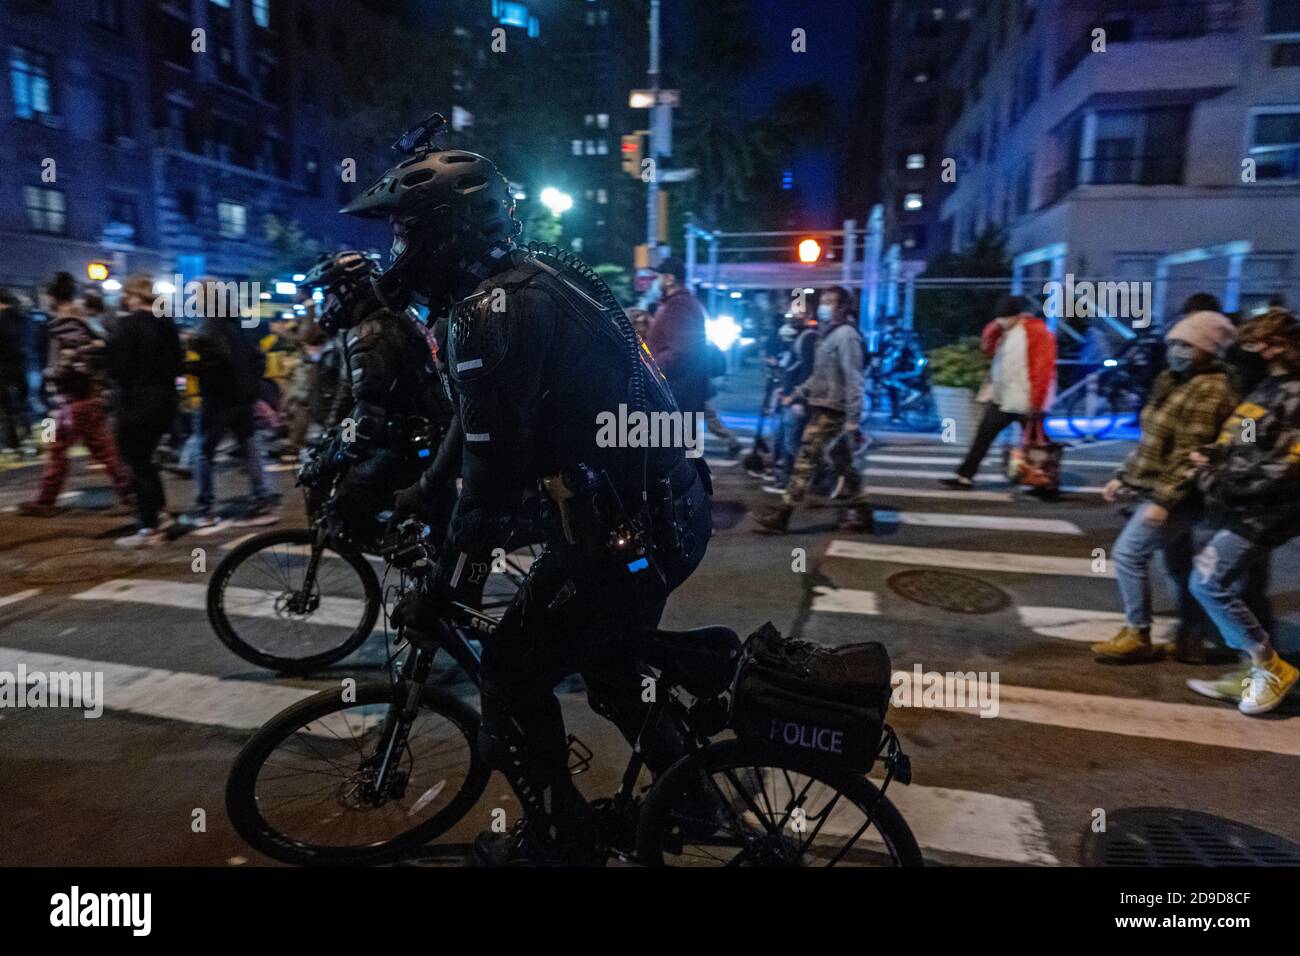 New York, New York, US. Nov 4th 2020. As the US awaits election results, bicycle-mounted police in body armor ride alongside anti-Trump protesters marching through New York City's Greenwich Village neighborhood Stock Photo